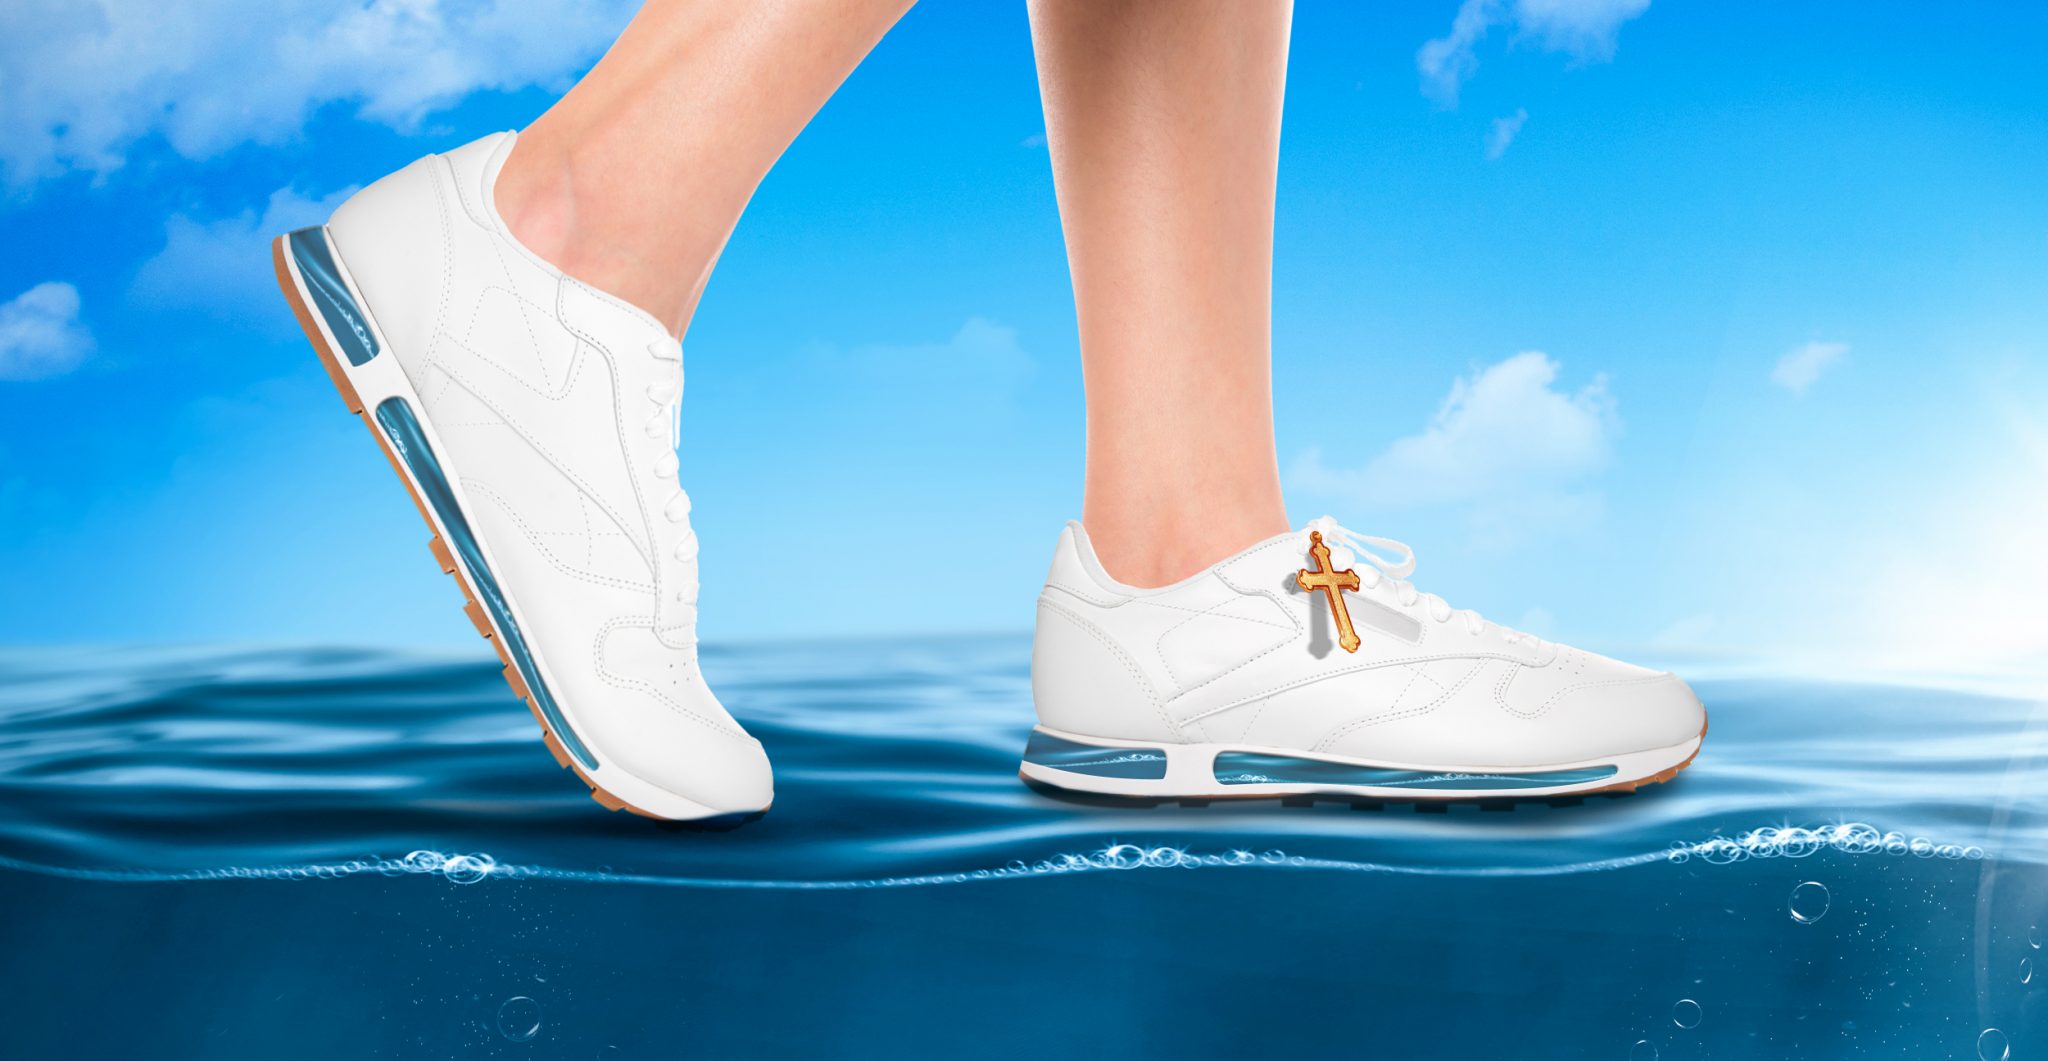 shoes that can walk on water